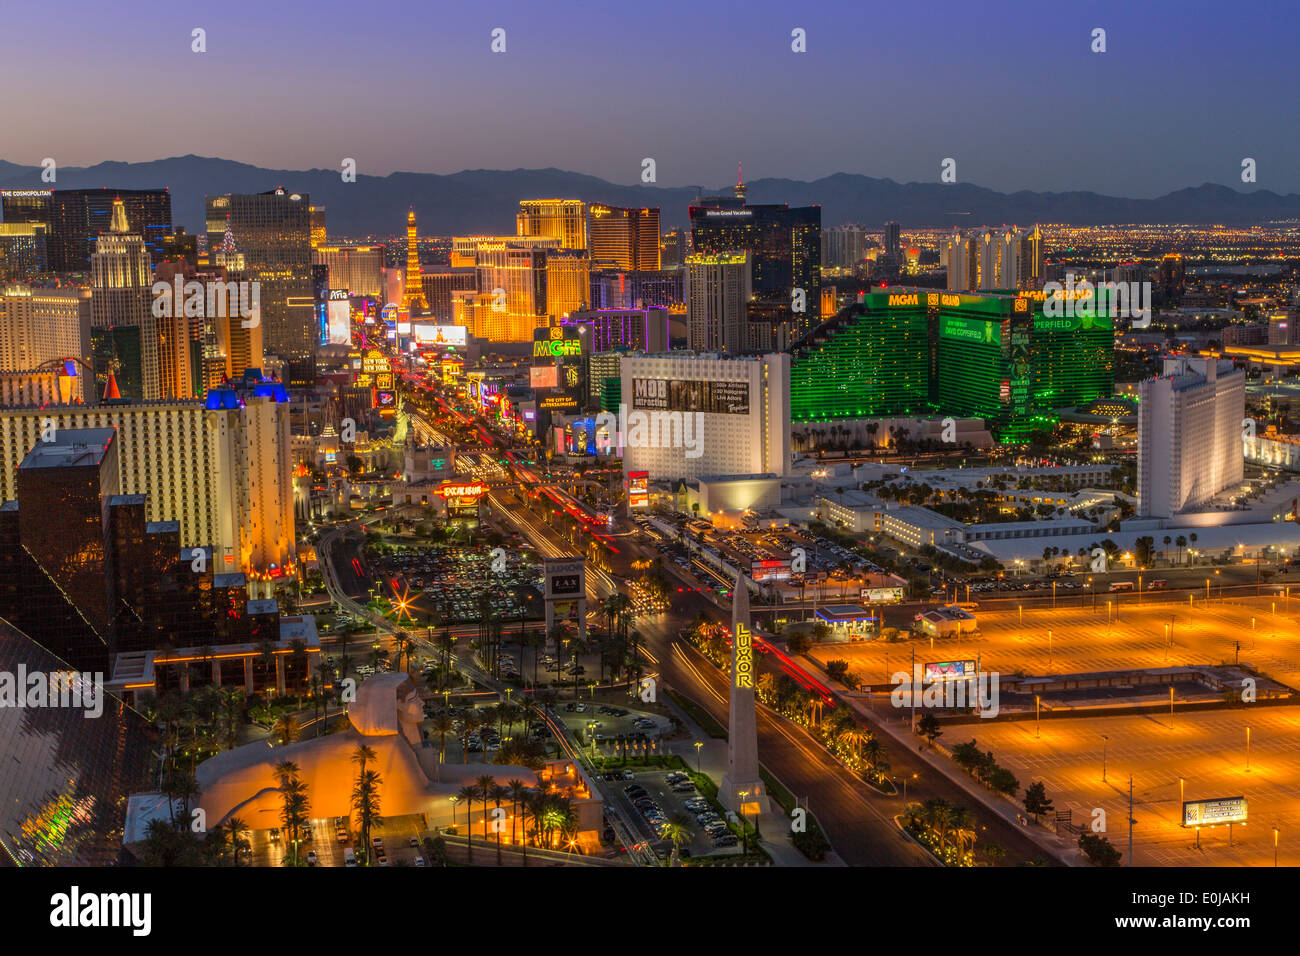 An Elevated colourful panoramic view of The Las Vegas strip at dusk with the Luxor Hotel in the foreground, Las Vegas, Nevada, USA Stock Photo